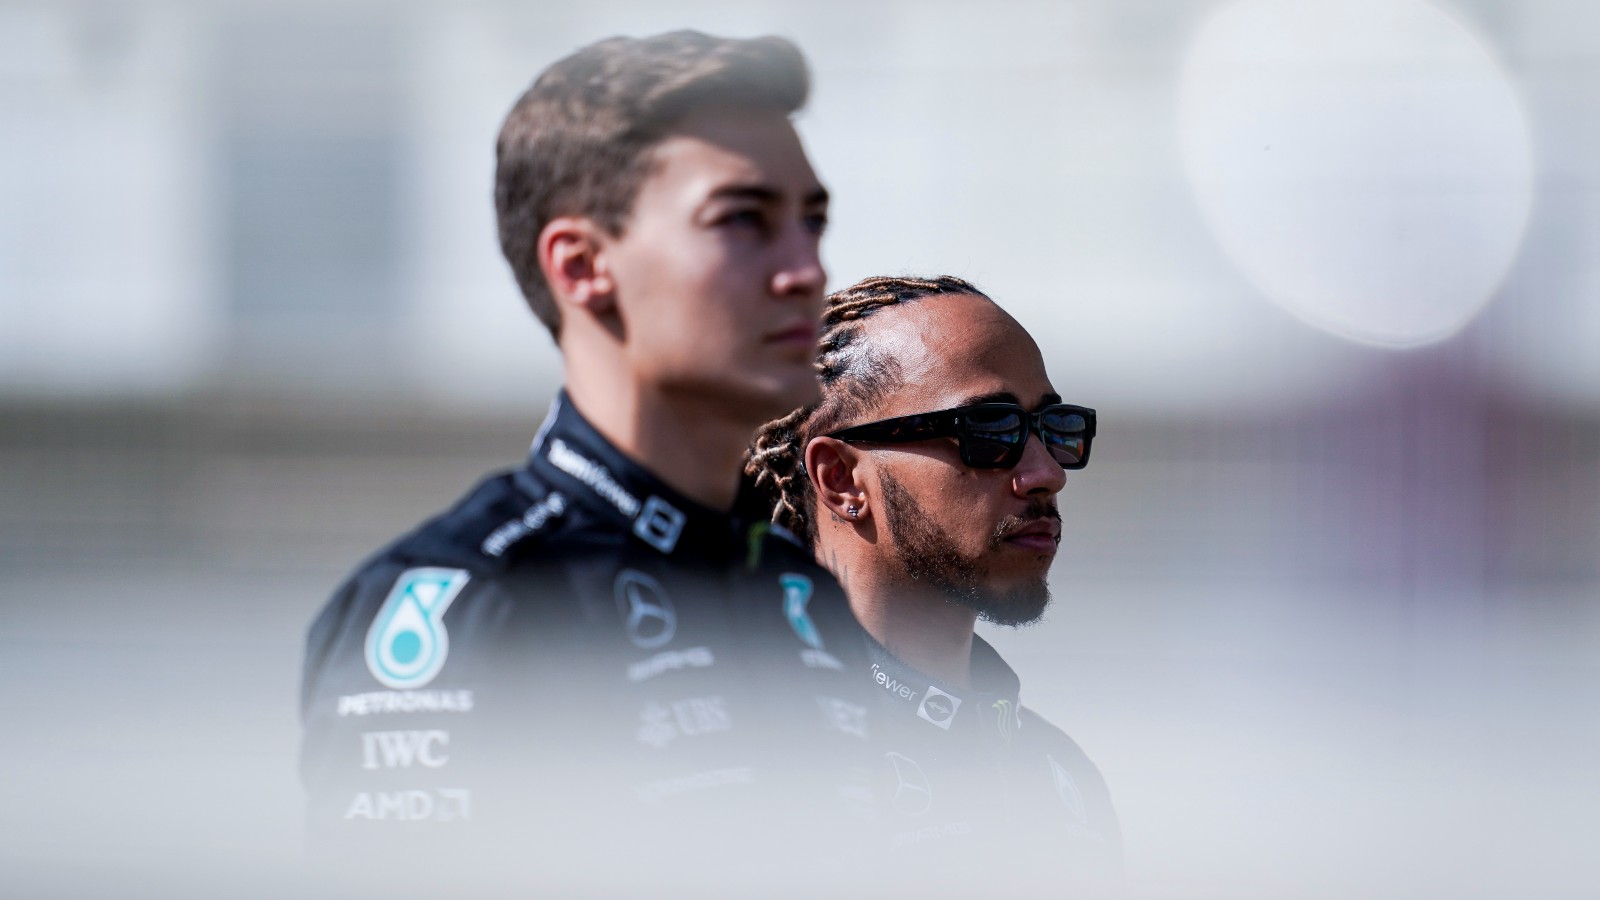 Mercedes drivers George Russell and Lewis Hamilton look forward. Bahrain, March 2022.